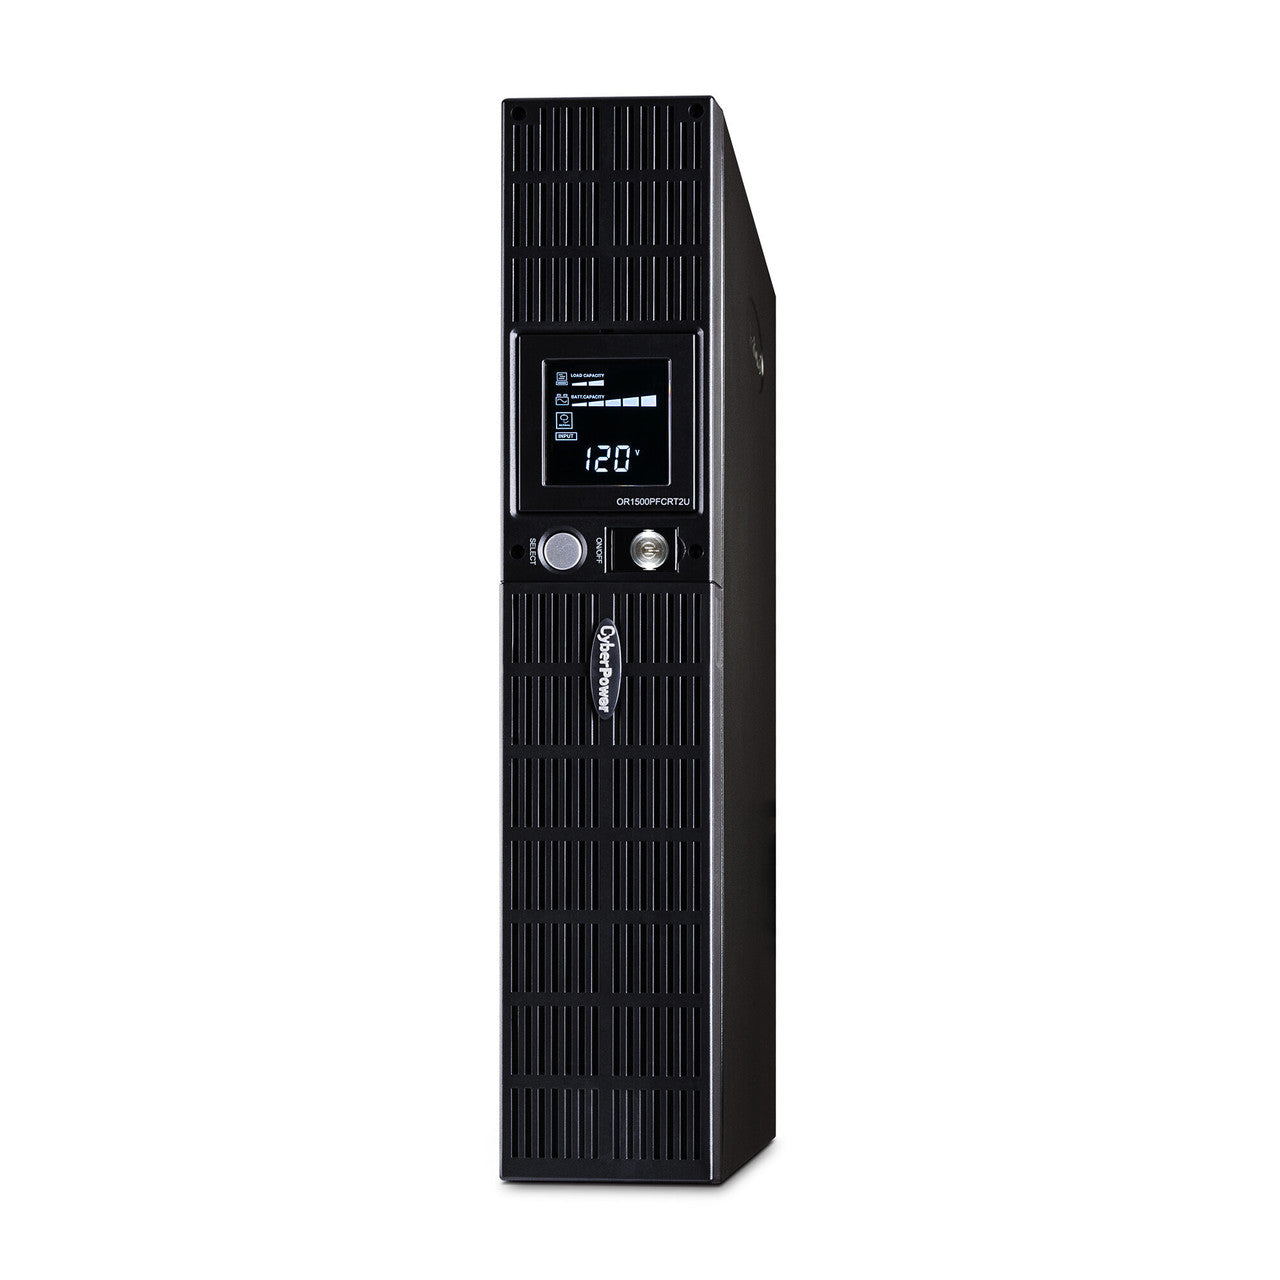 CyberPower OR1500PFCRT2U 1500VA/1050W Rack/Tower UPS with 8 outlets Sine Wave output AVR and LCD